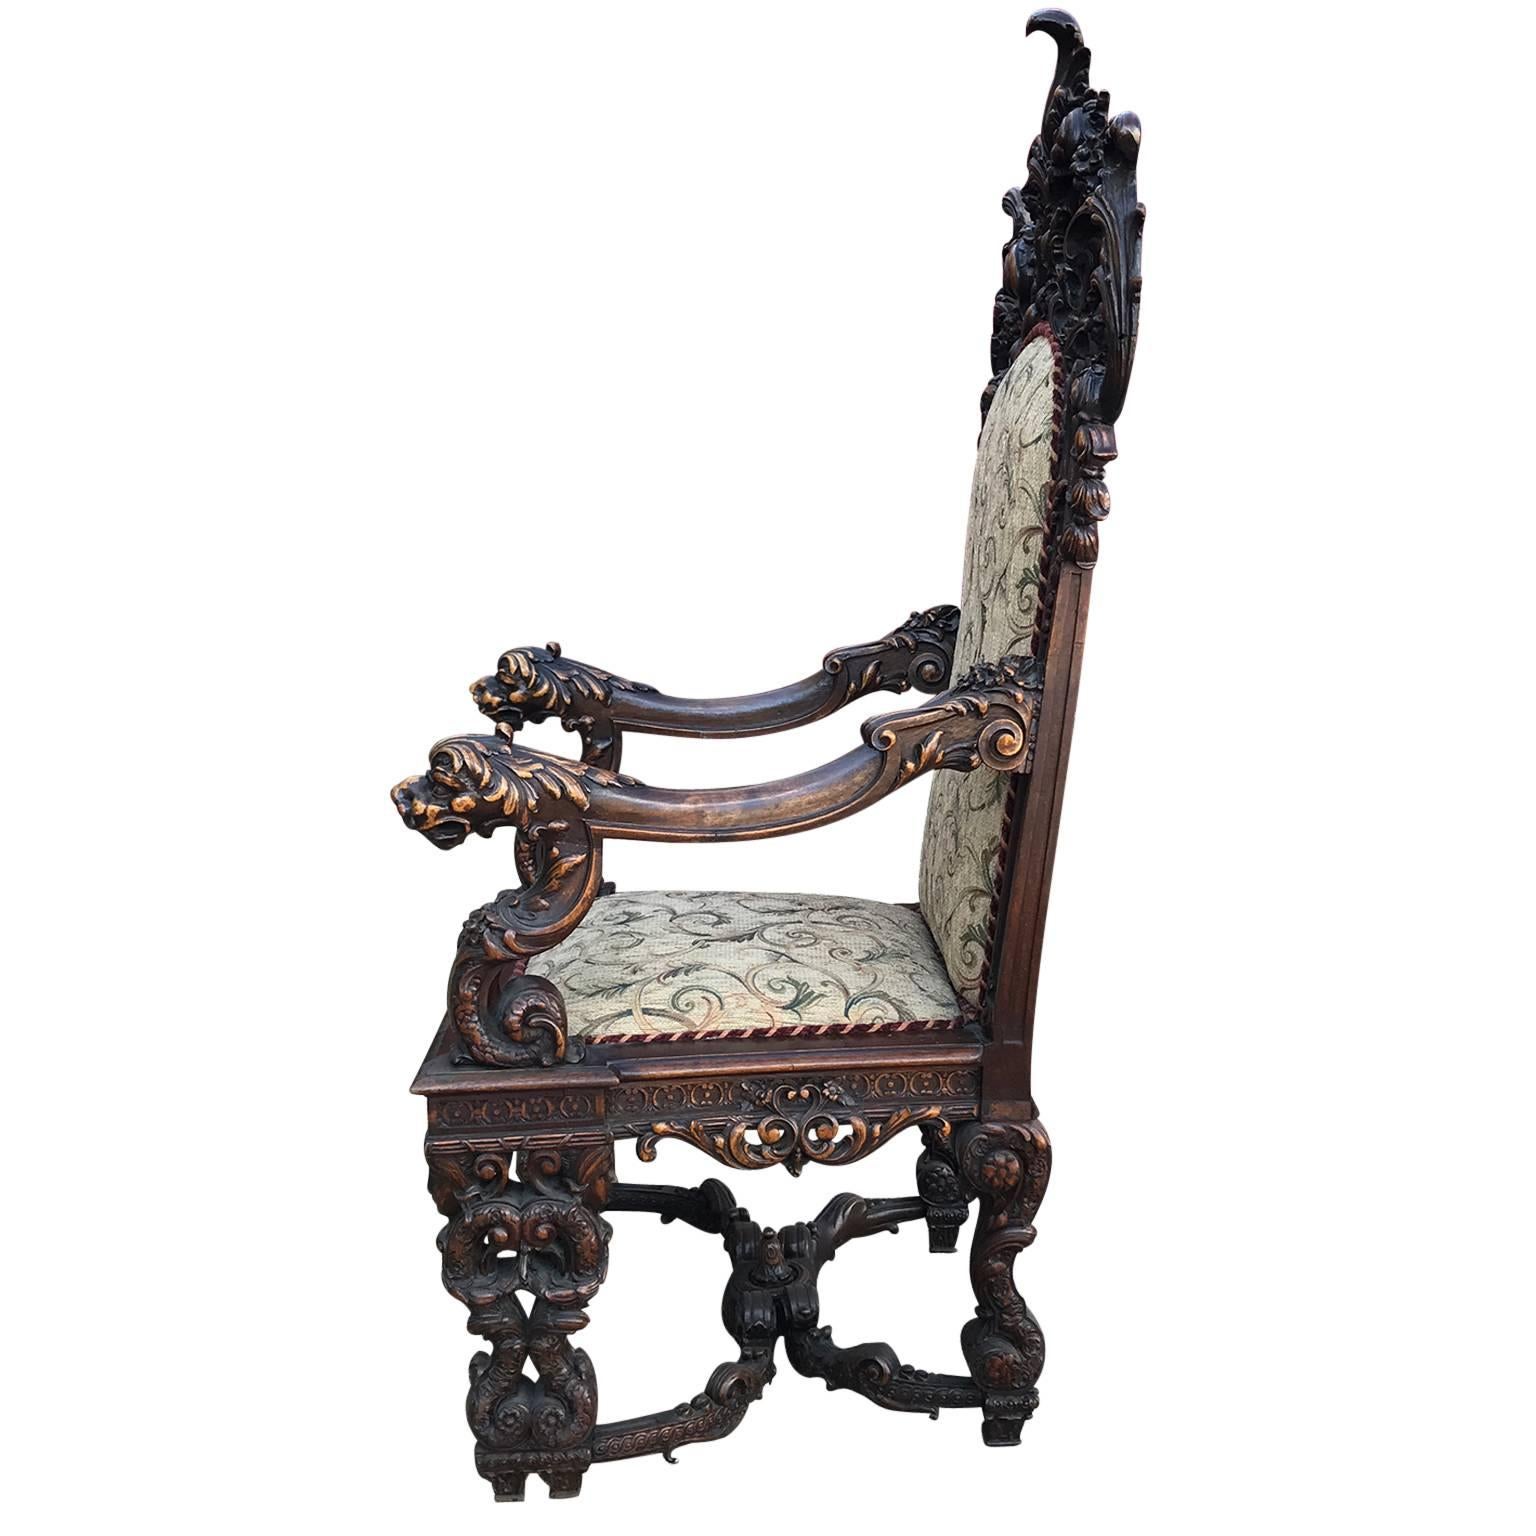 Rococo Revival Highly Carved Pair of Rococo Throne Chairs with Cream Cushions